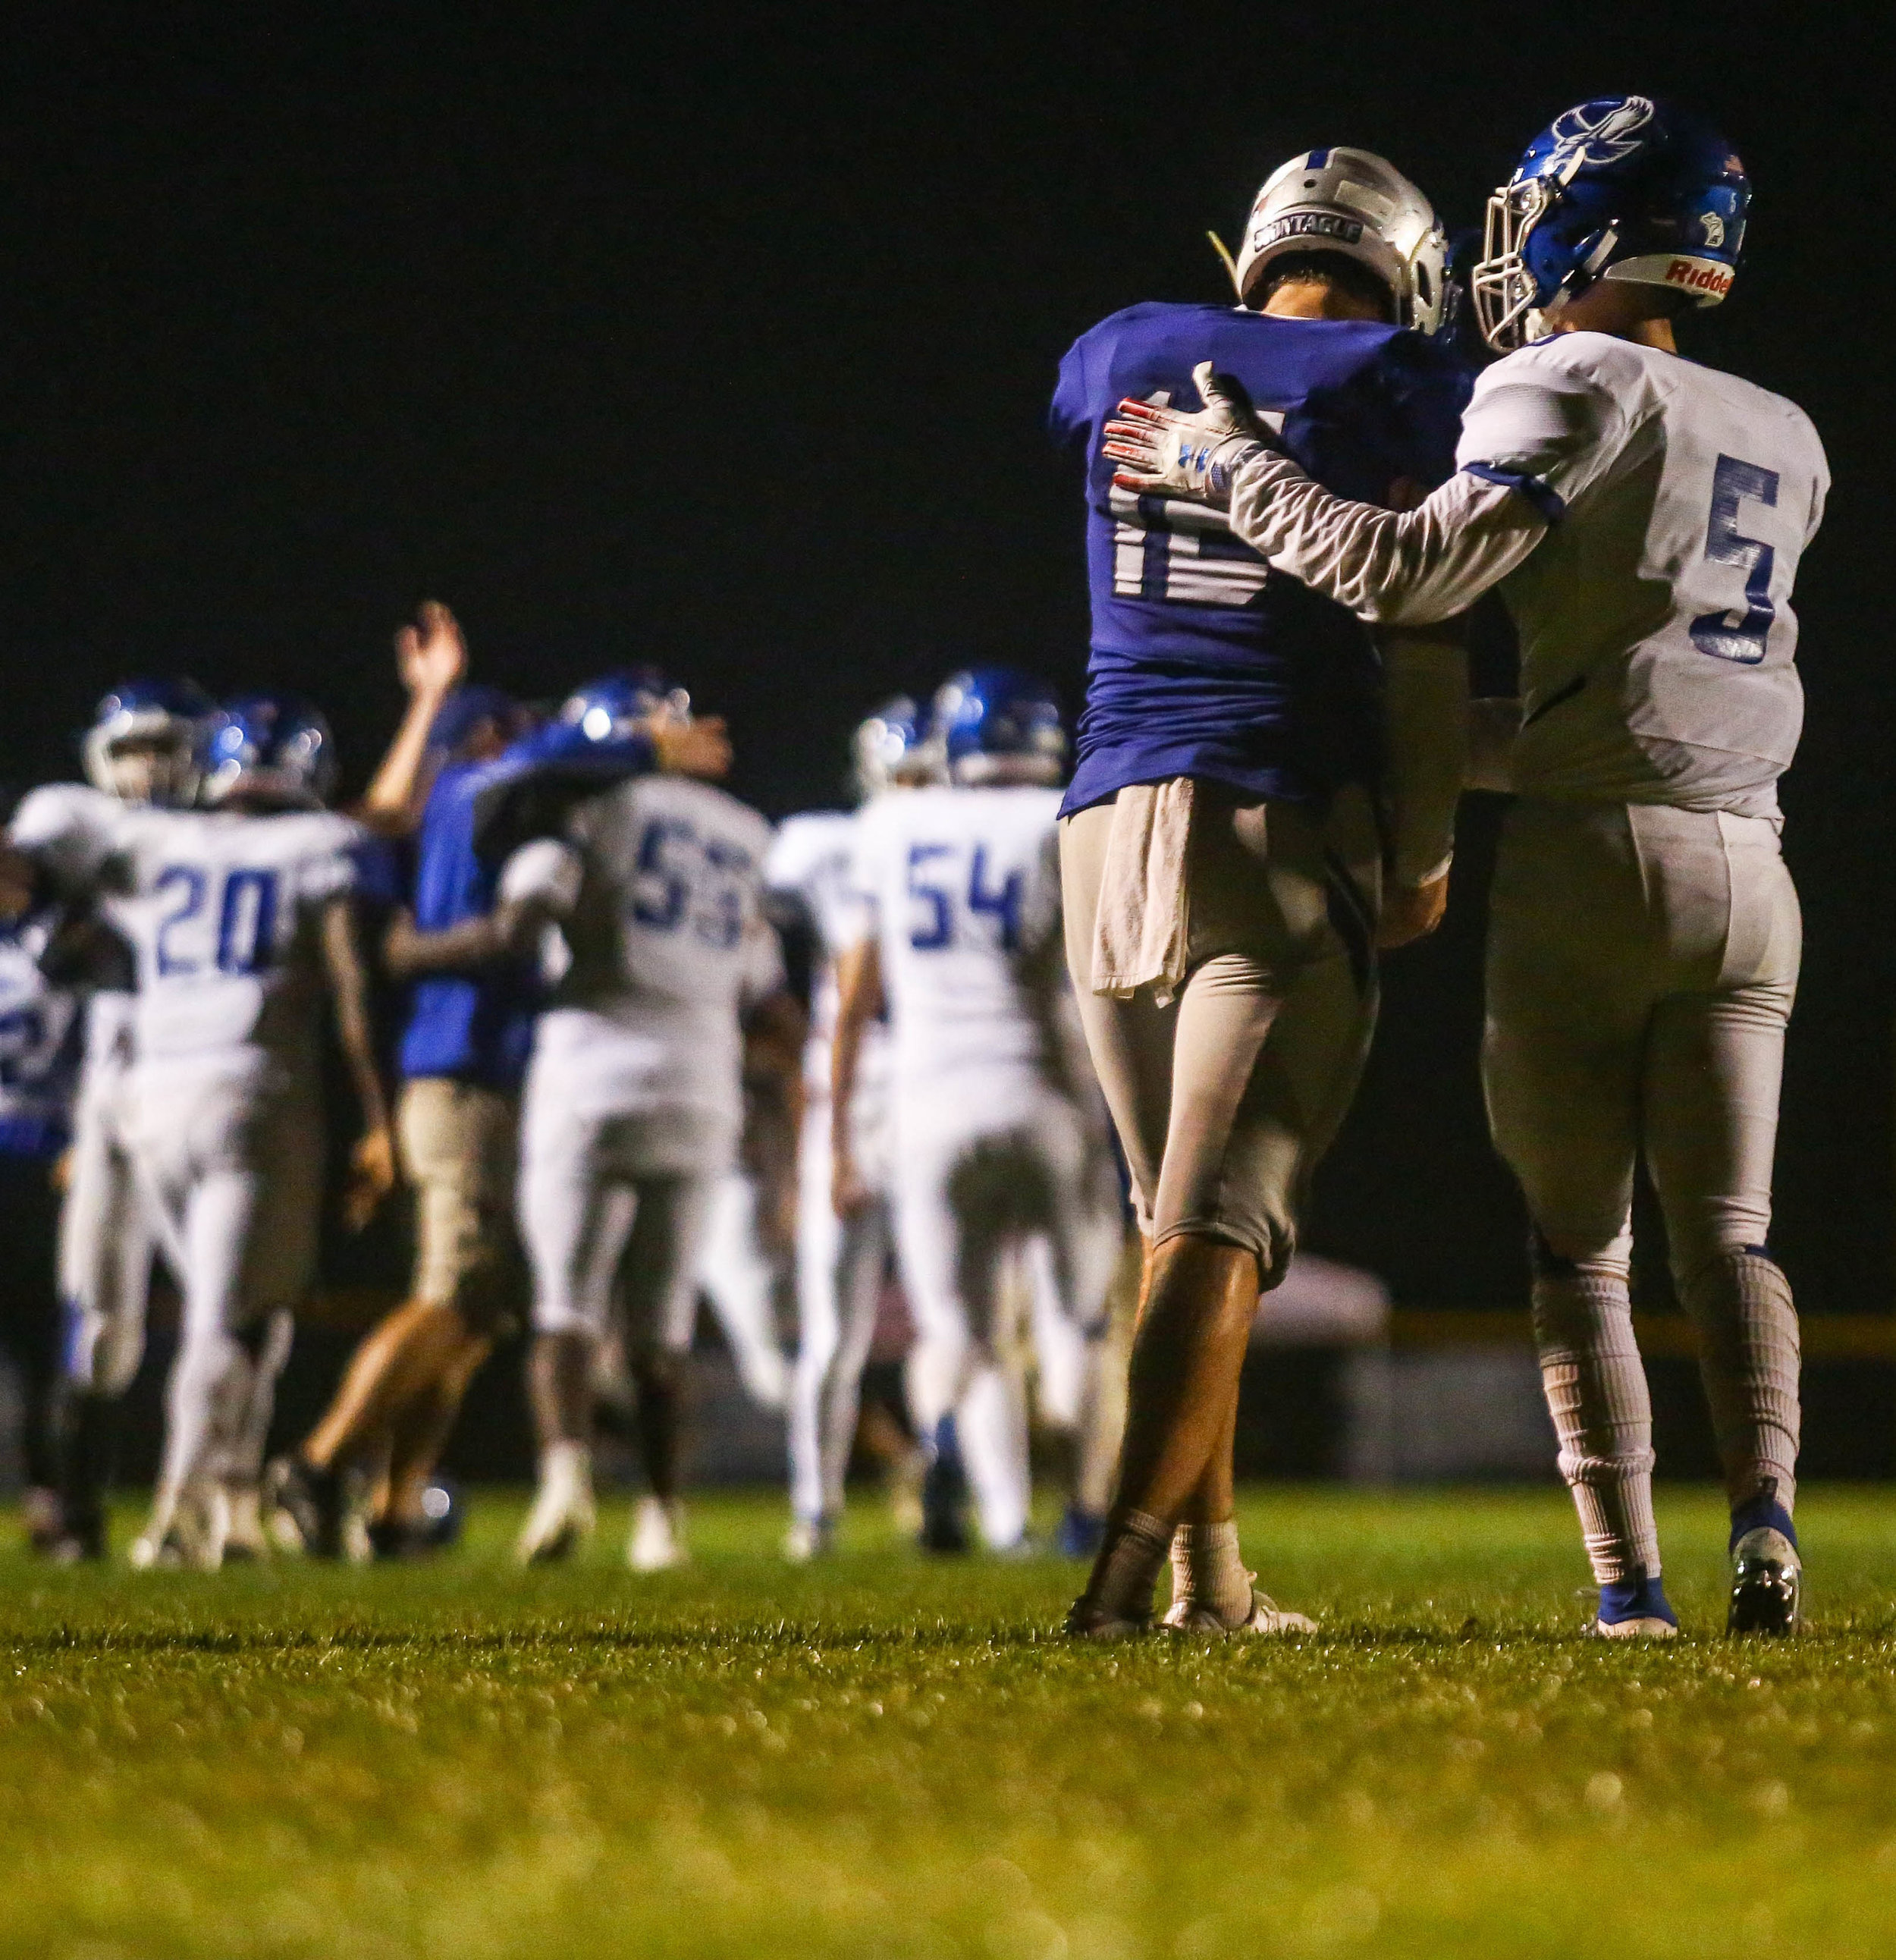  In a display of good sportsmanship, Oakridge's Ethan Carmean (5) consoles Montague quarterback Drew Collins (12) after the Eagles' dramatic 15-13 overtime victory over the Wildcats in Montague on Friday, Sept. 27, 2019. 